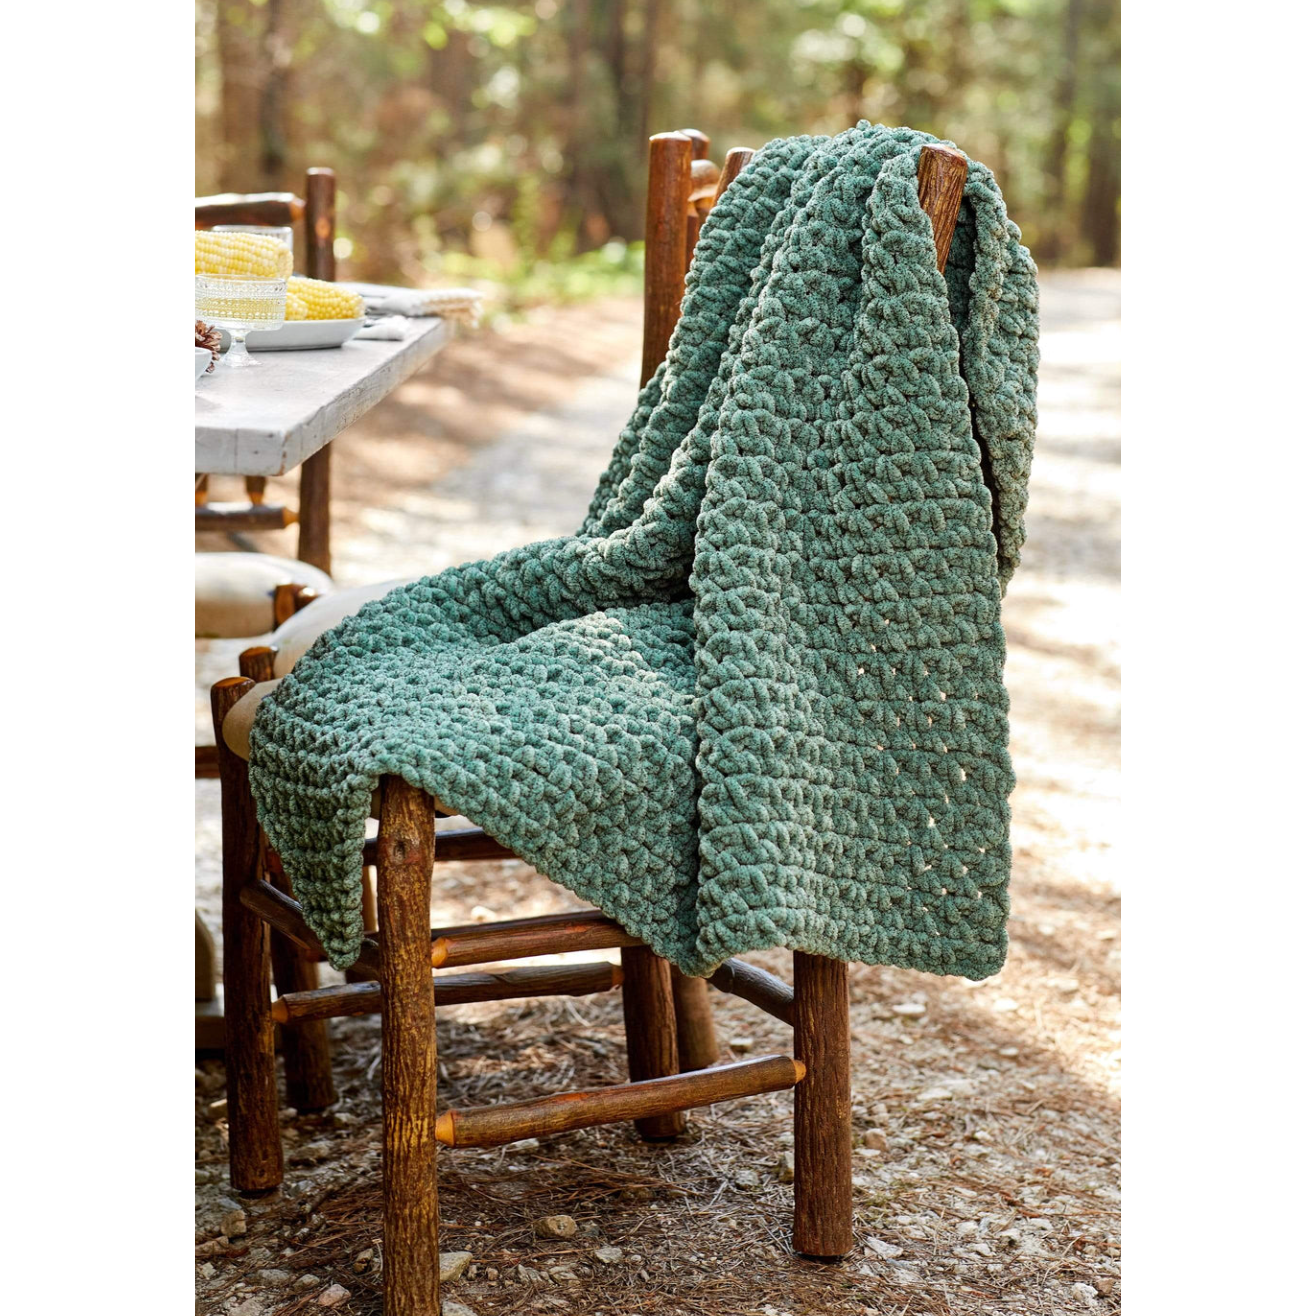 Forest Throw Free Pattern